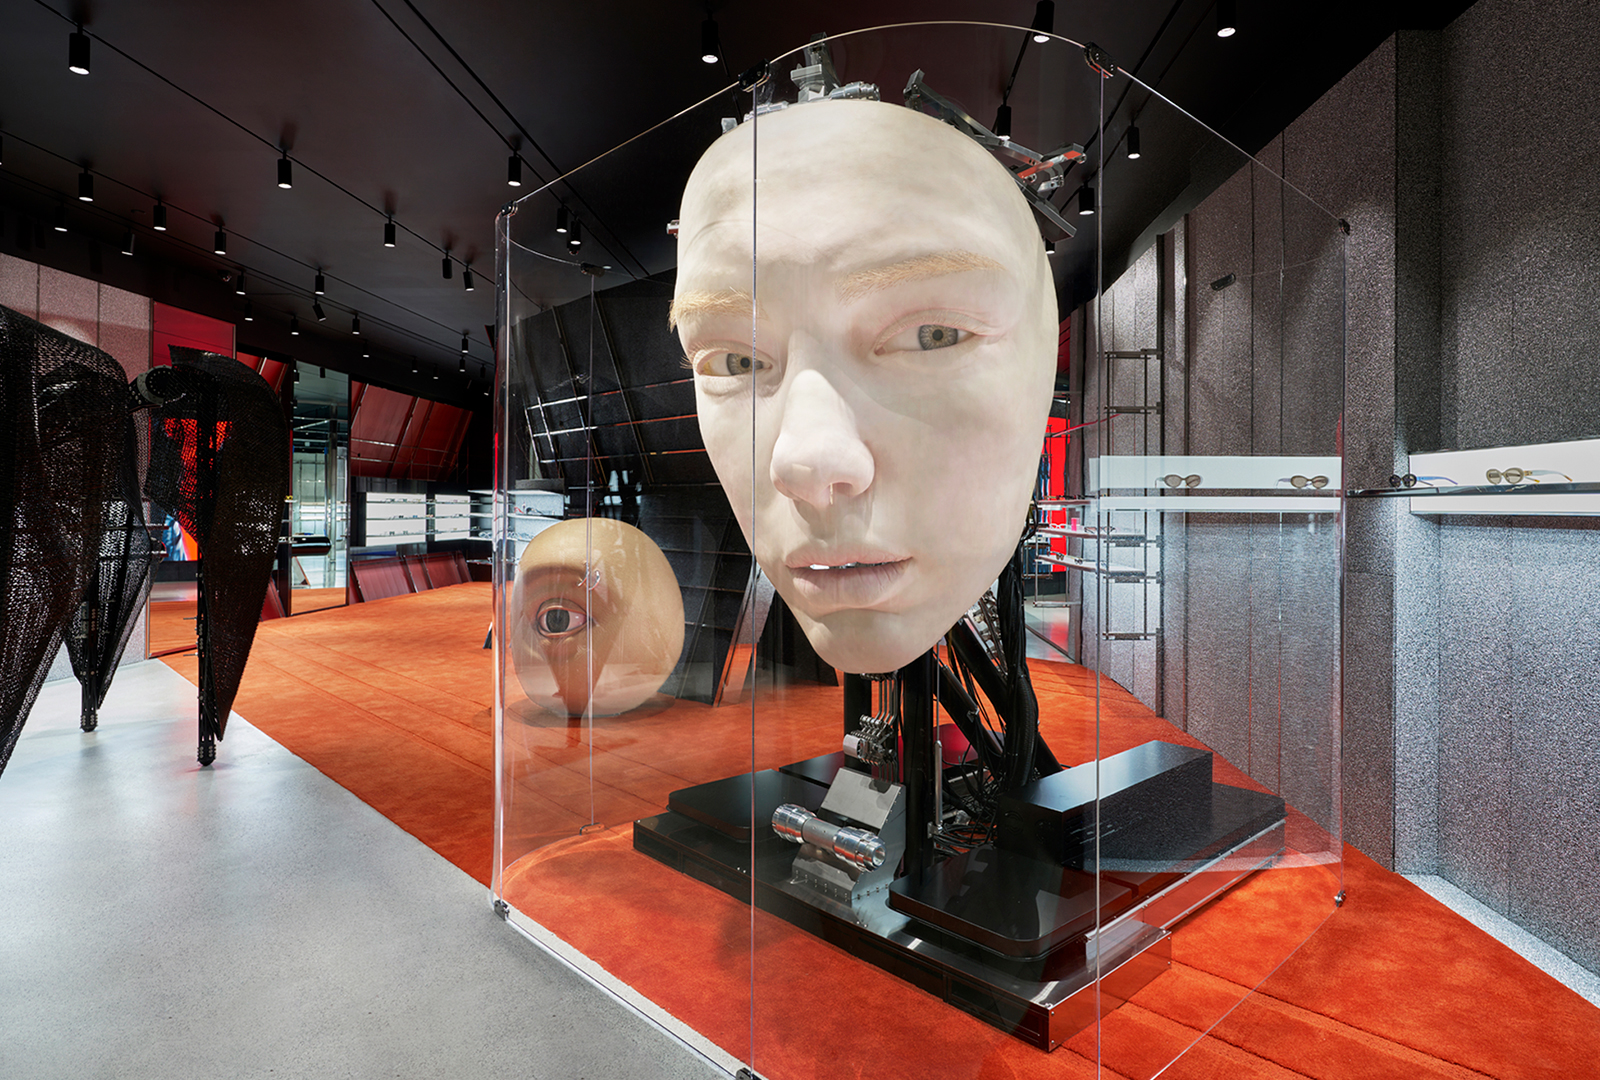 Now at Houston's Galleria: Really unsettling robots